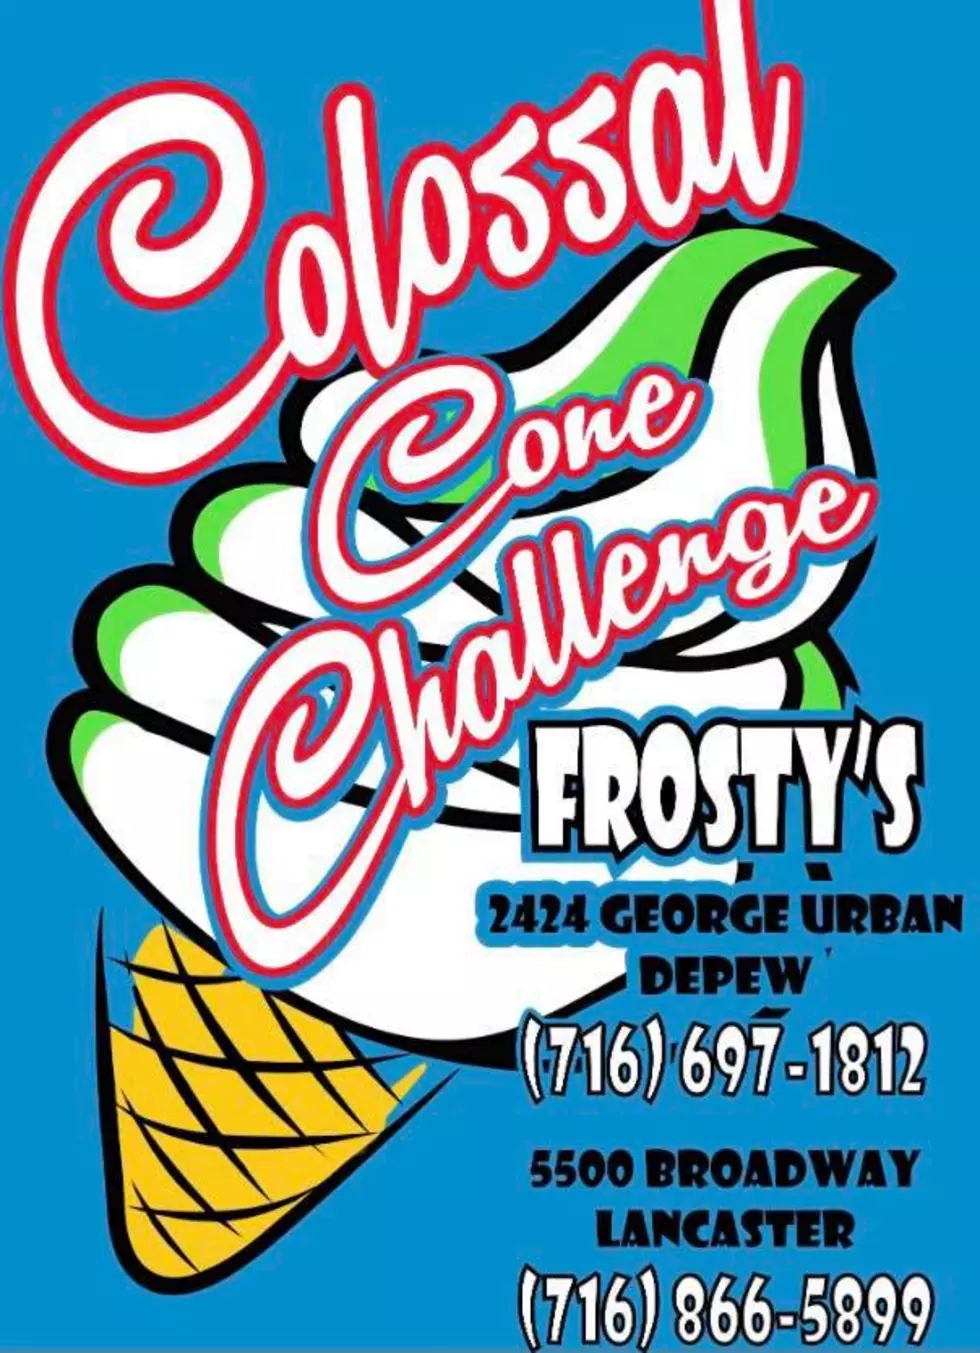 Get Ready For Tomorrow! Frosty&#8217;s Colossal Cone Challenge